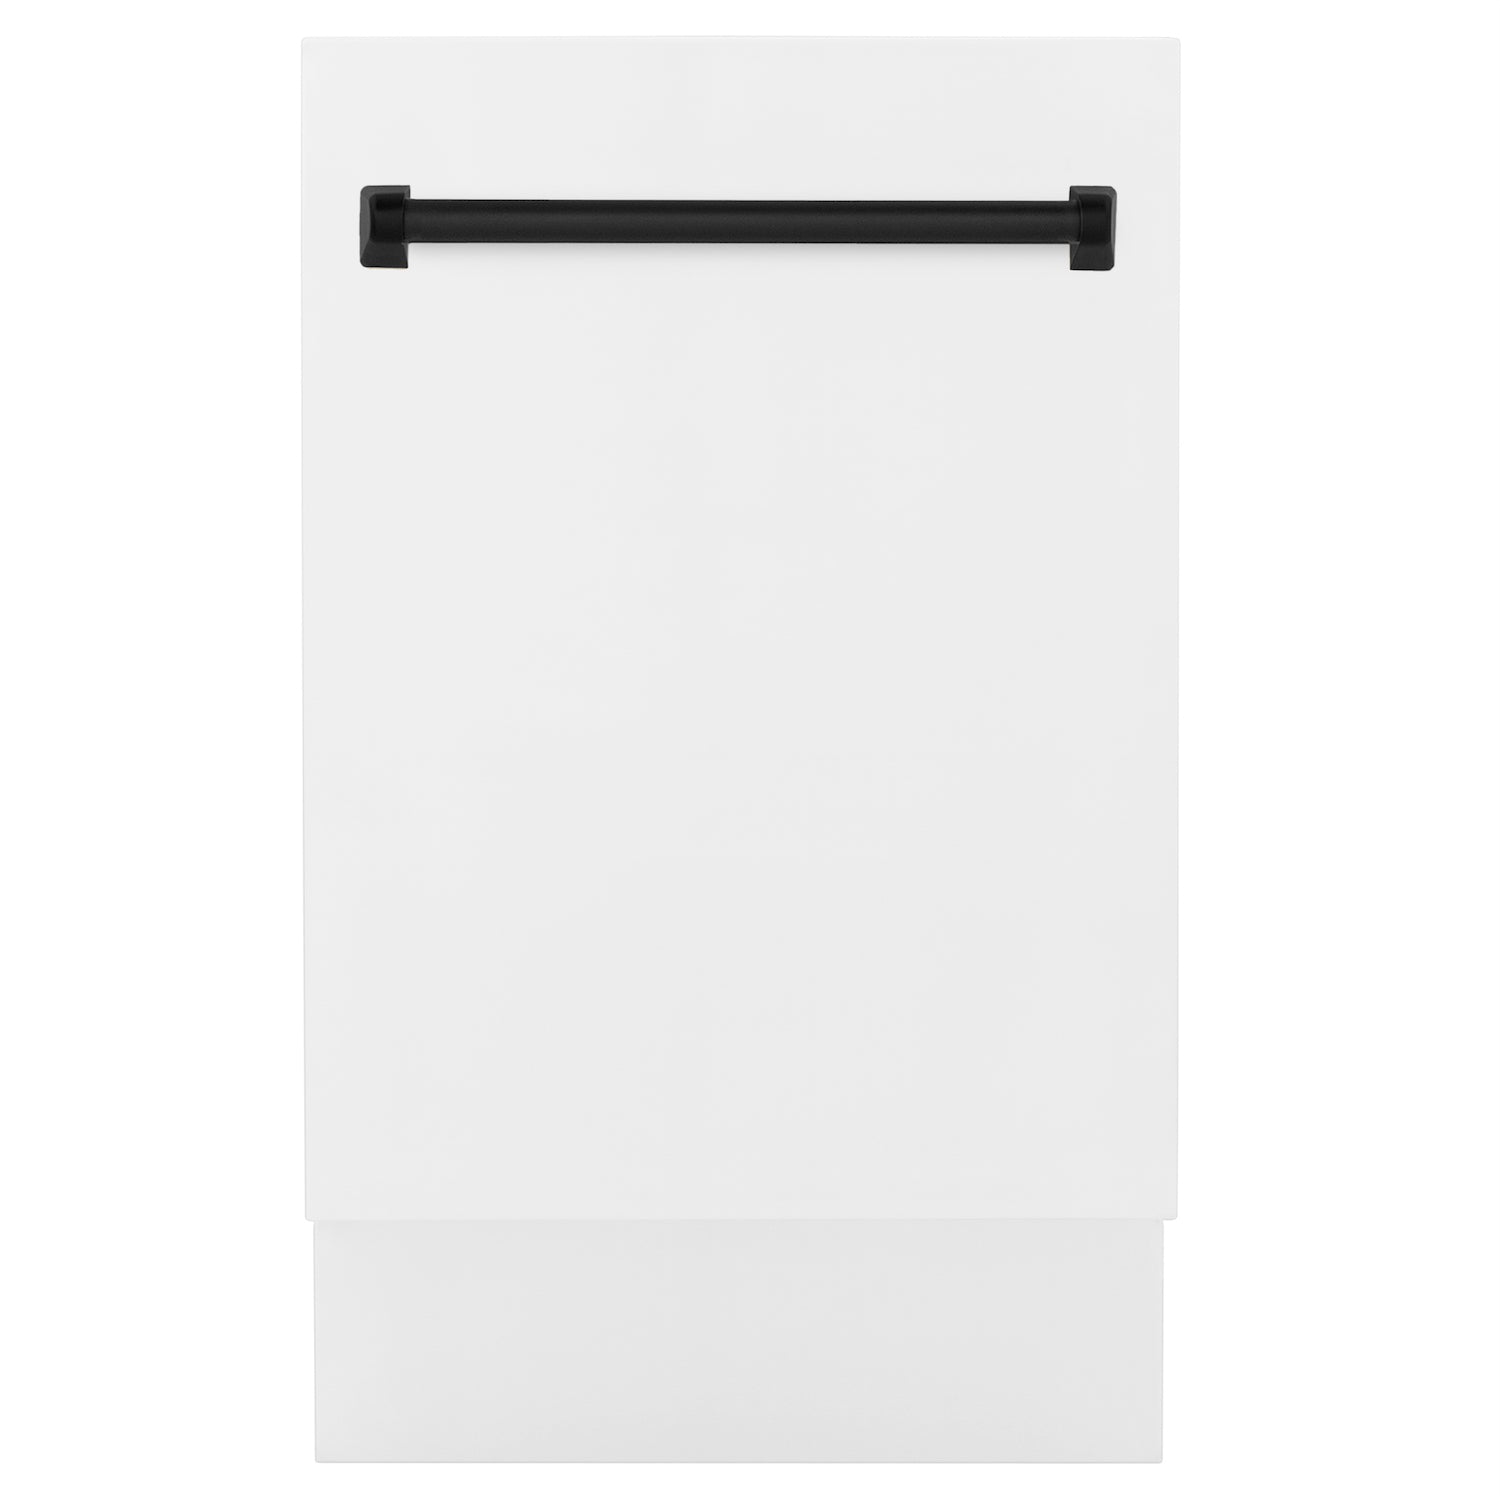 ZLINE Autograph Edition 18 in. Tallac Series 3rd Rack Top Control Built-In Dishwasher in White Matte with Matte Black Handle, 51dBa (DWVZ-WM-18-MB)